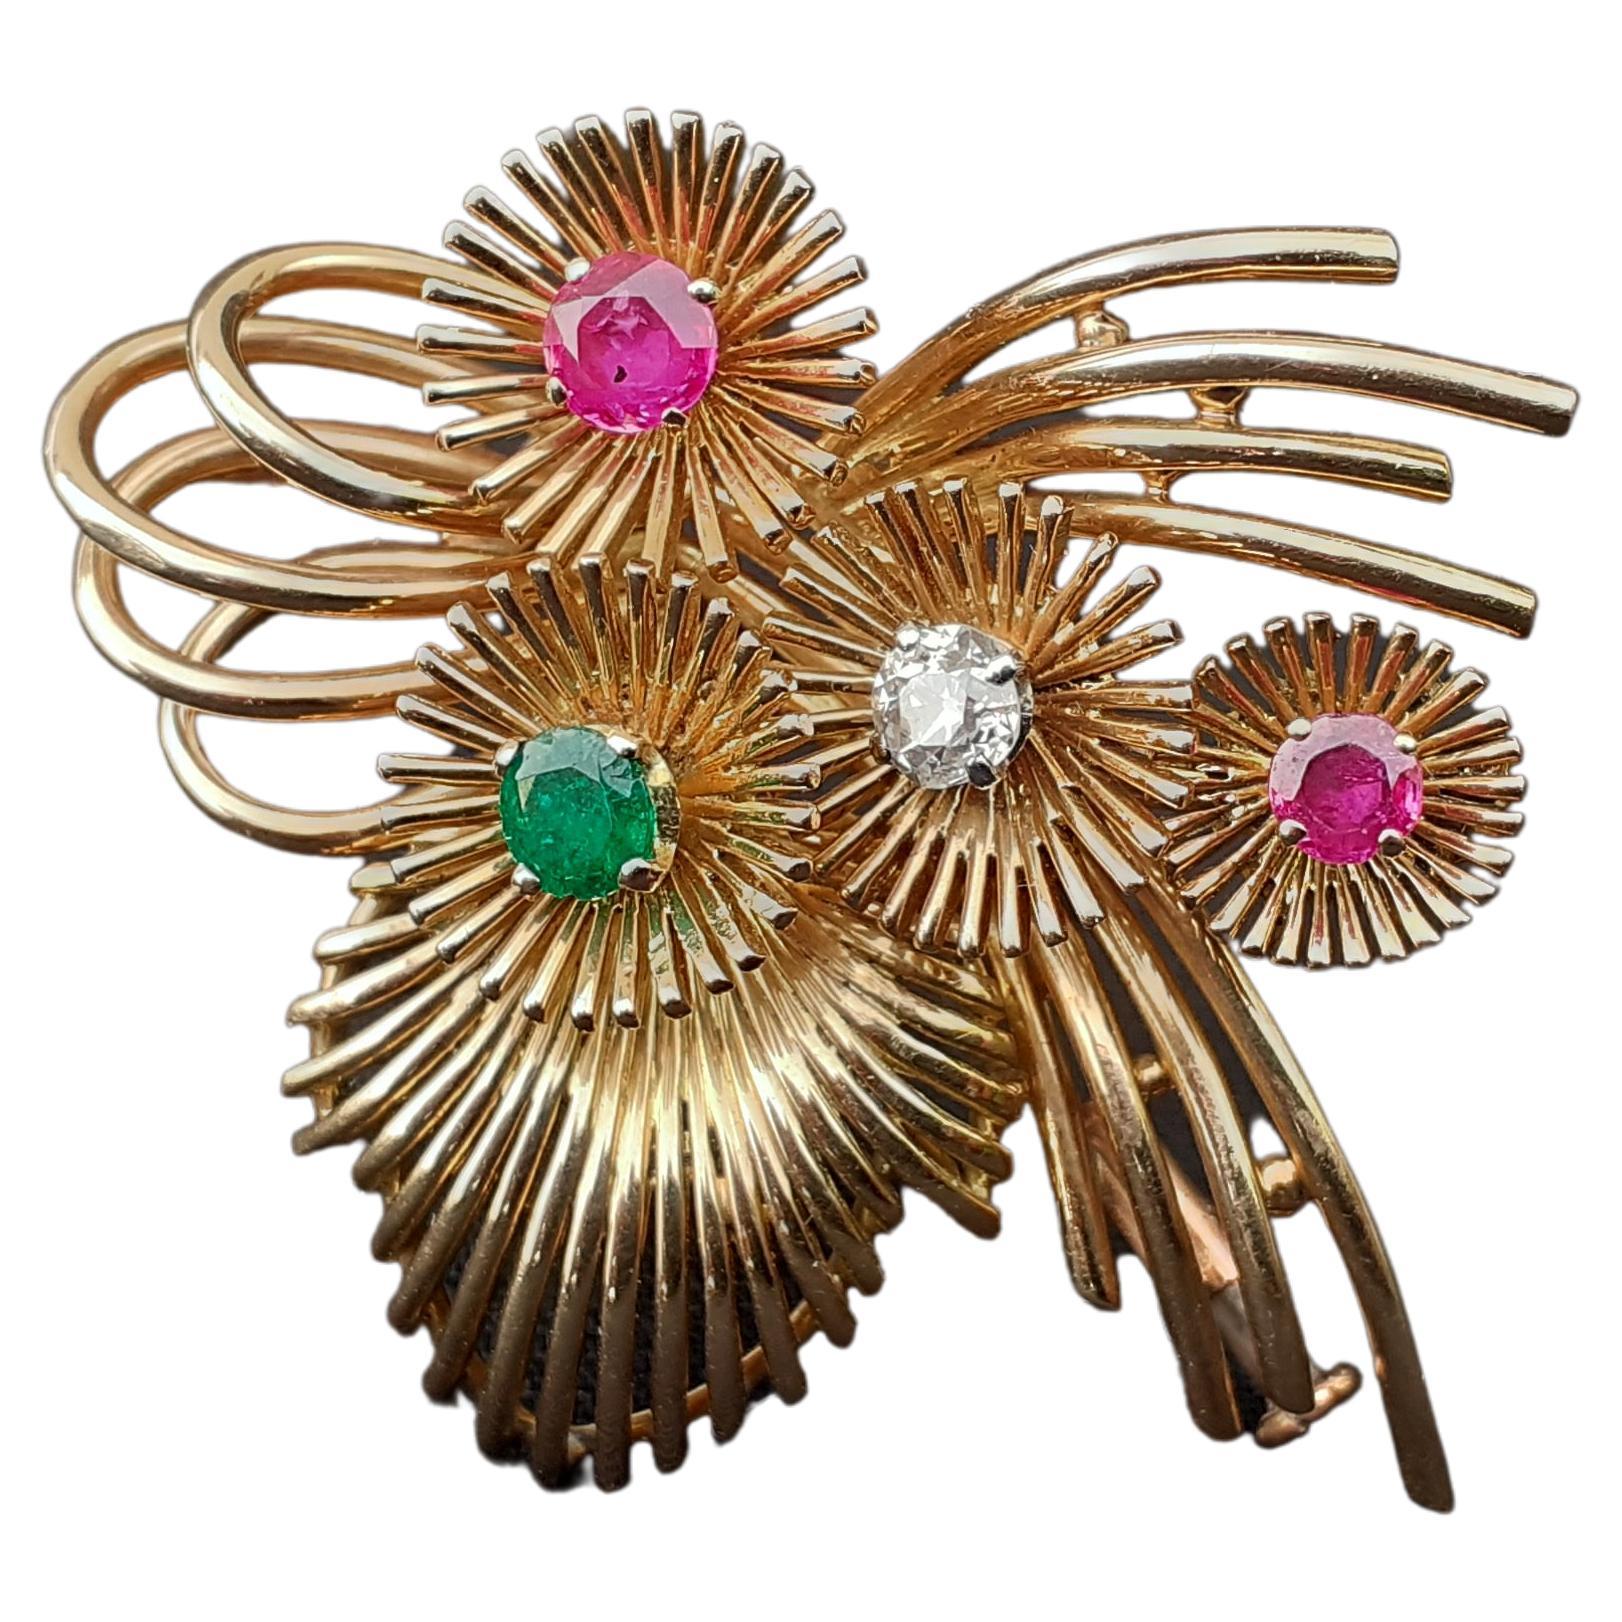 Sumptuous Bouquet of Flowers Lapel Pin Brooch in Gold and Gems For Sale